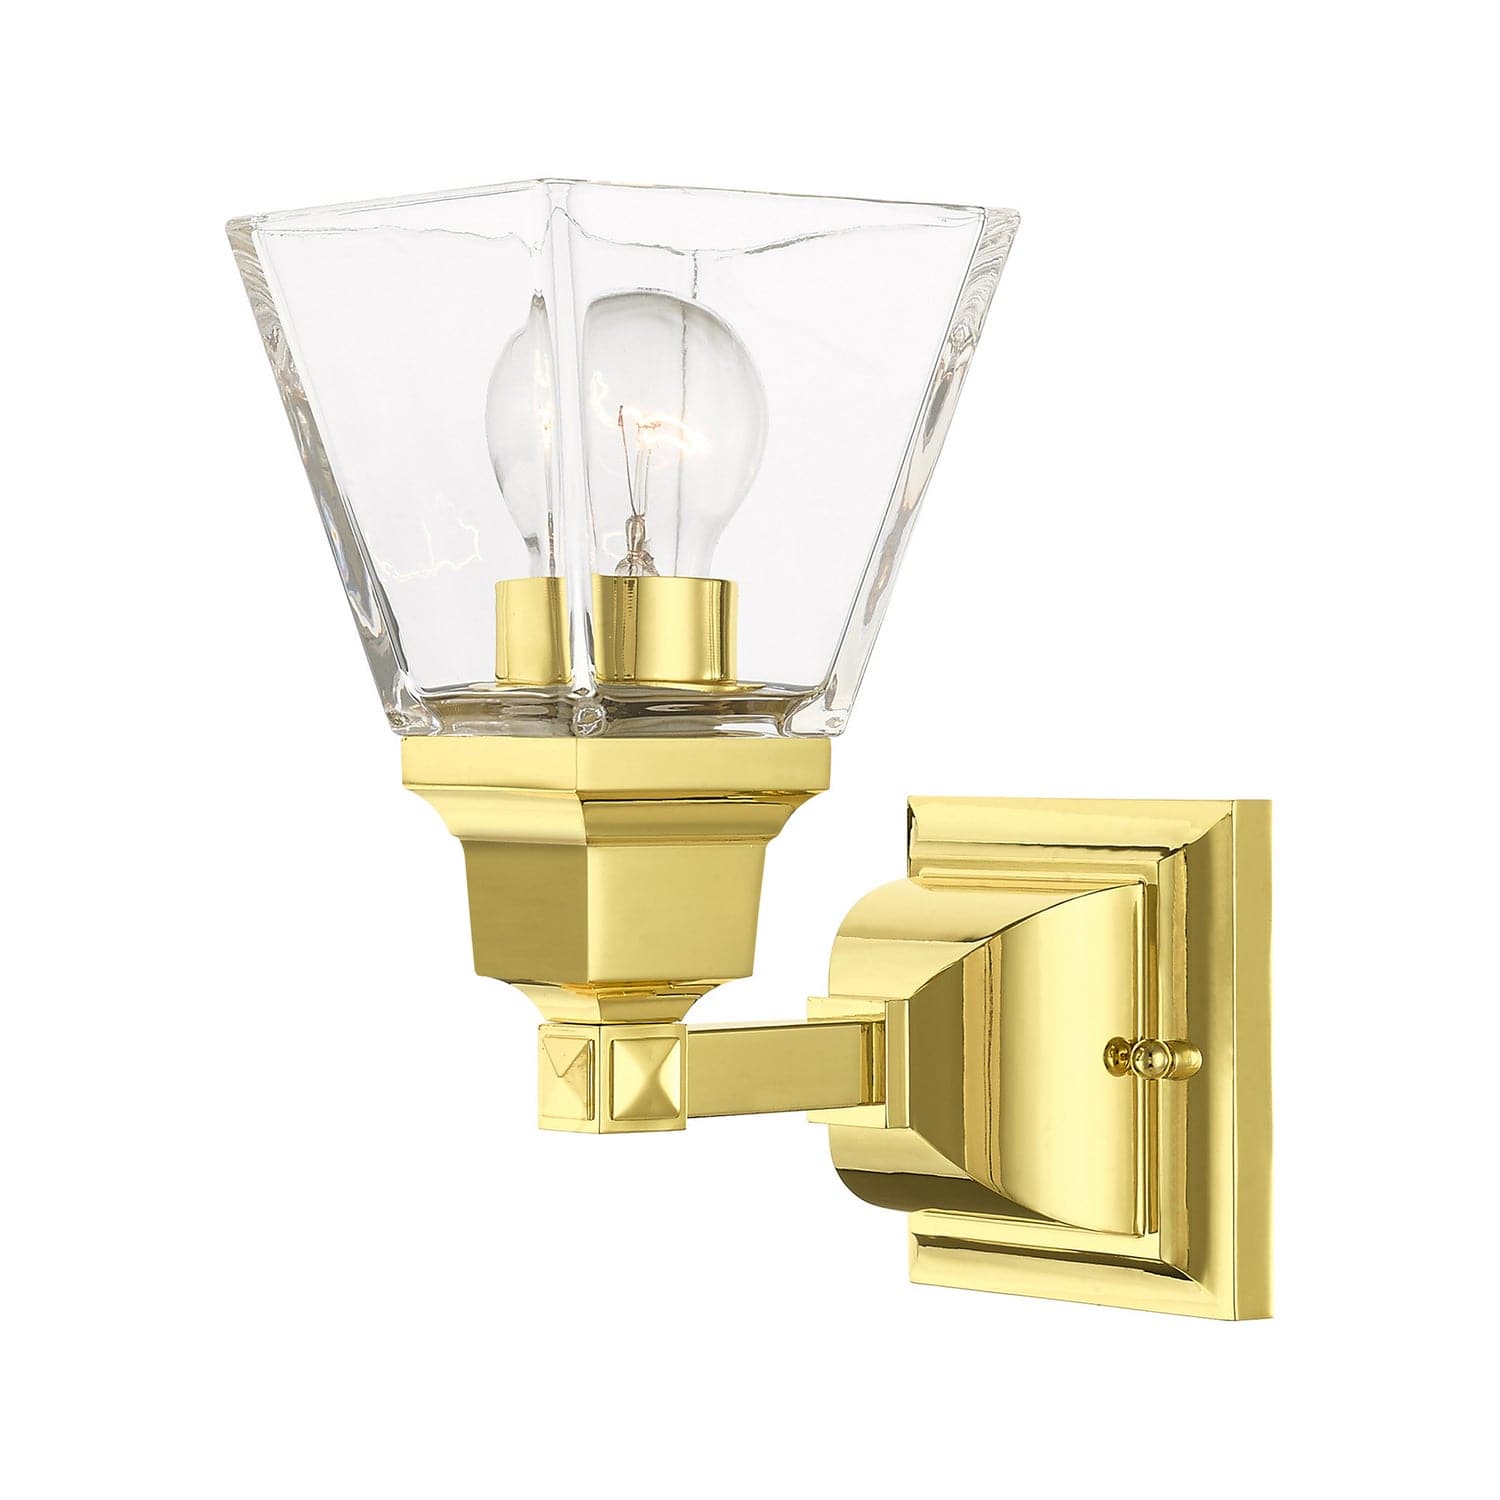 Livex Lighting - 17171-02 - One Light Wall Sconce - Mission - Polished Brass